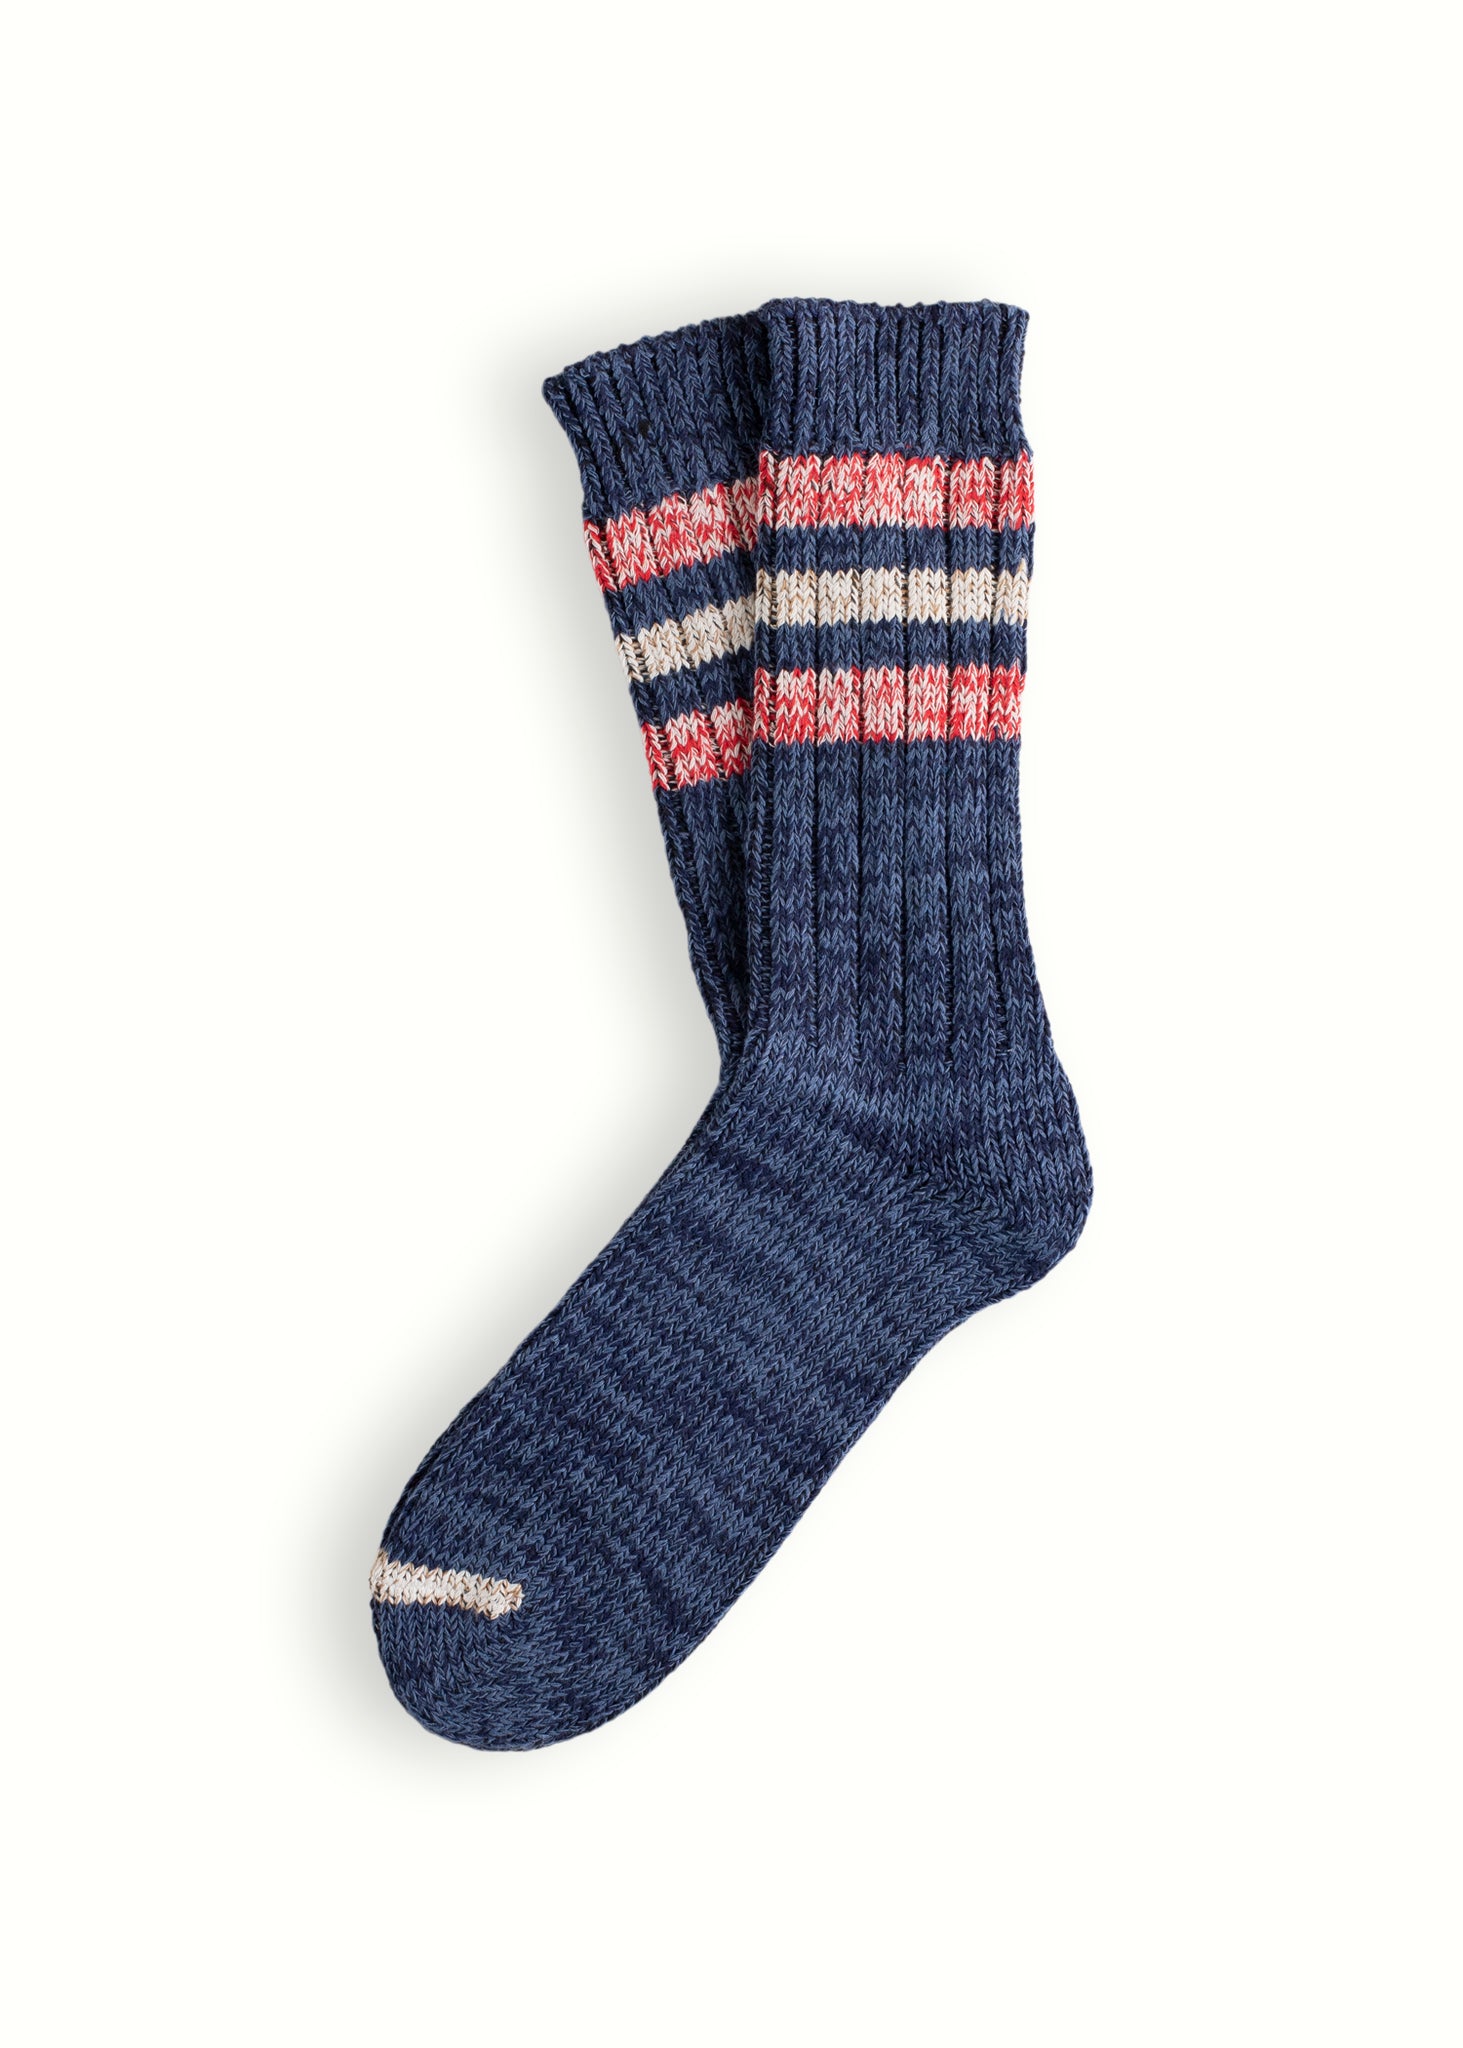 OUTSIDERS COLLECTION Navy Socks